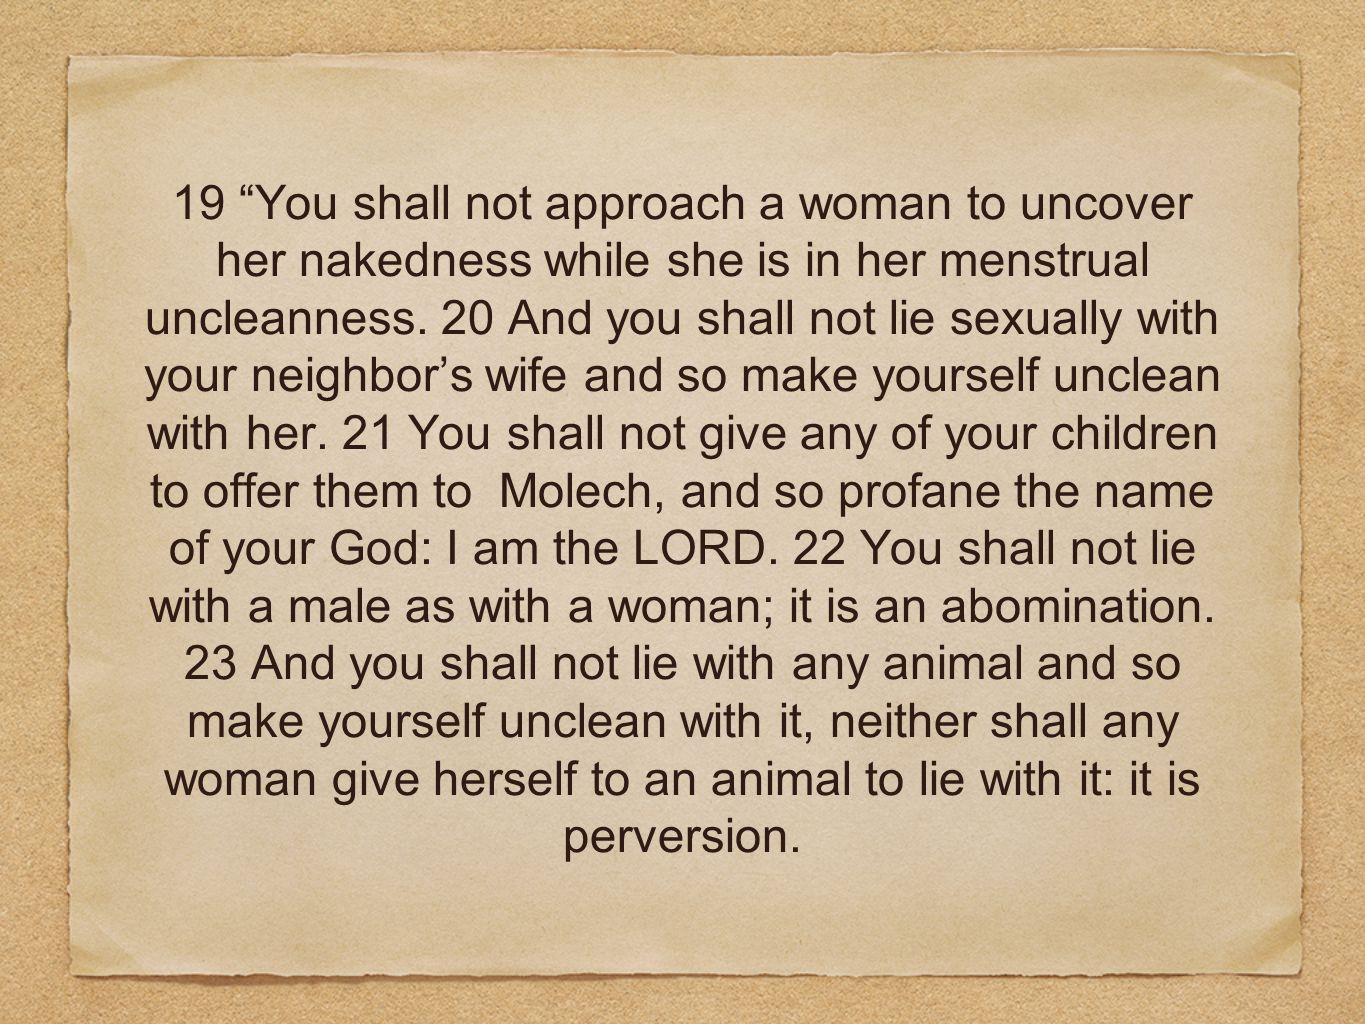 19 You shall not approach a woman to uncover her nakedness while she is in her menstrual uncleanness.